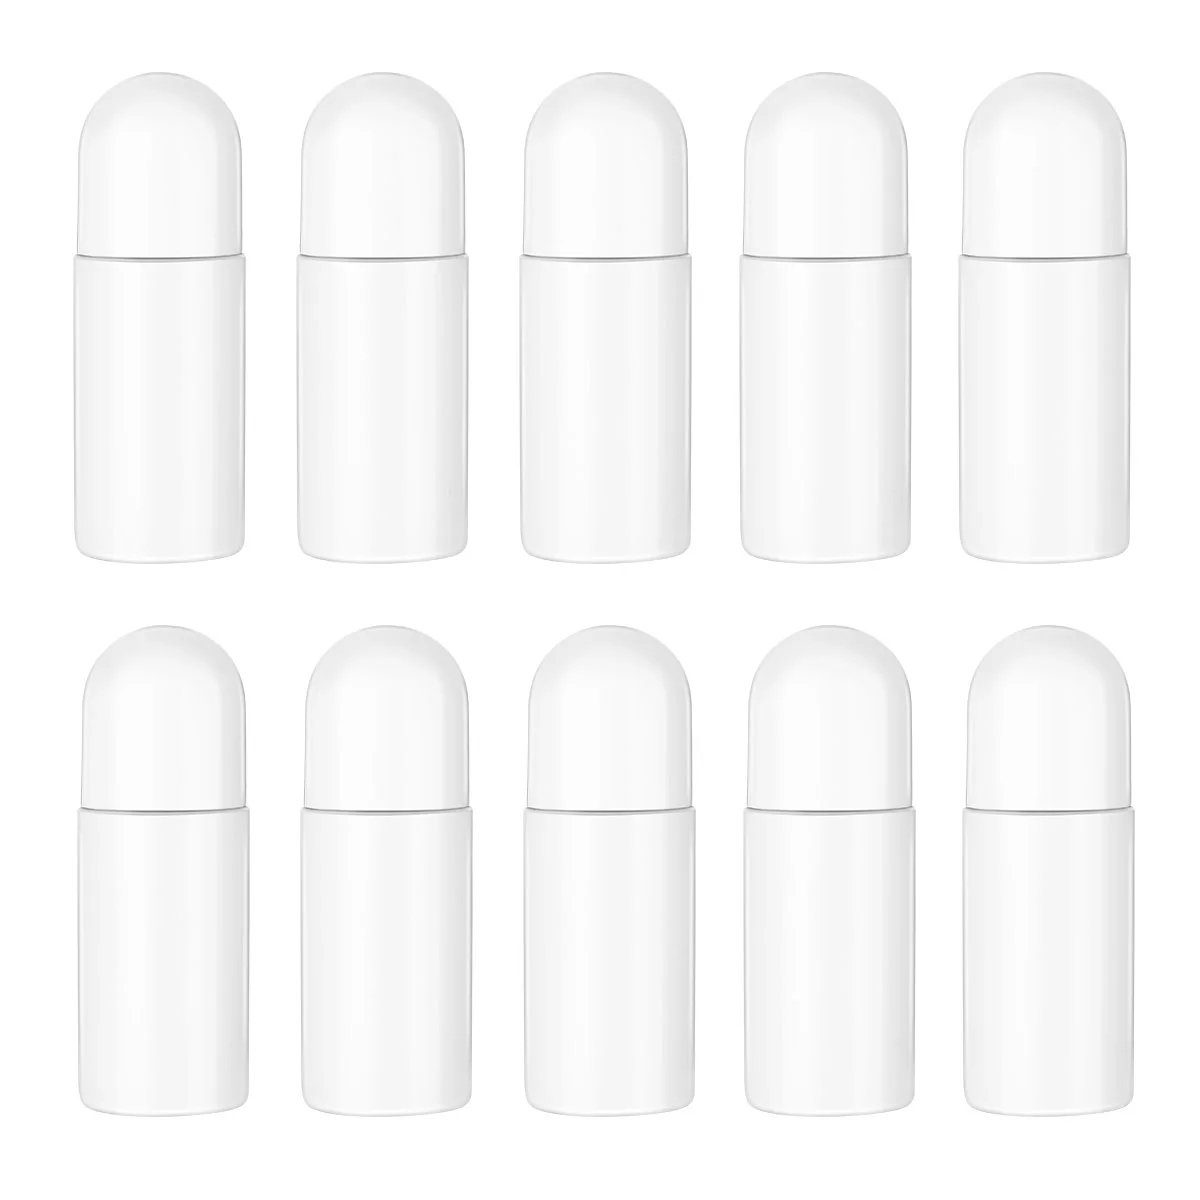 Plastic White Roll On Bottles for Essential Oils Reusable Leak-Proof Deodorant Containers with Plastic Roller Ball